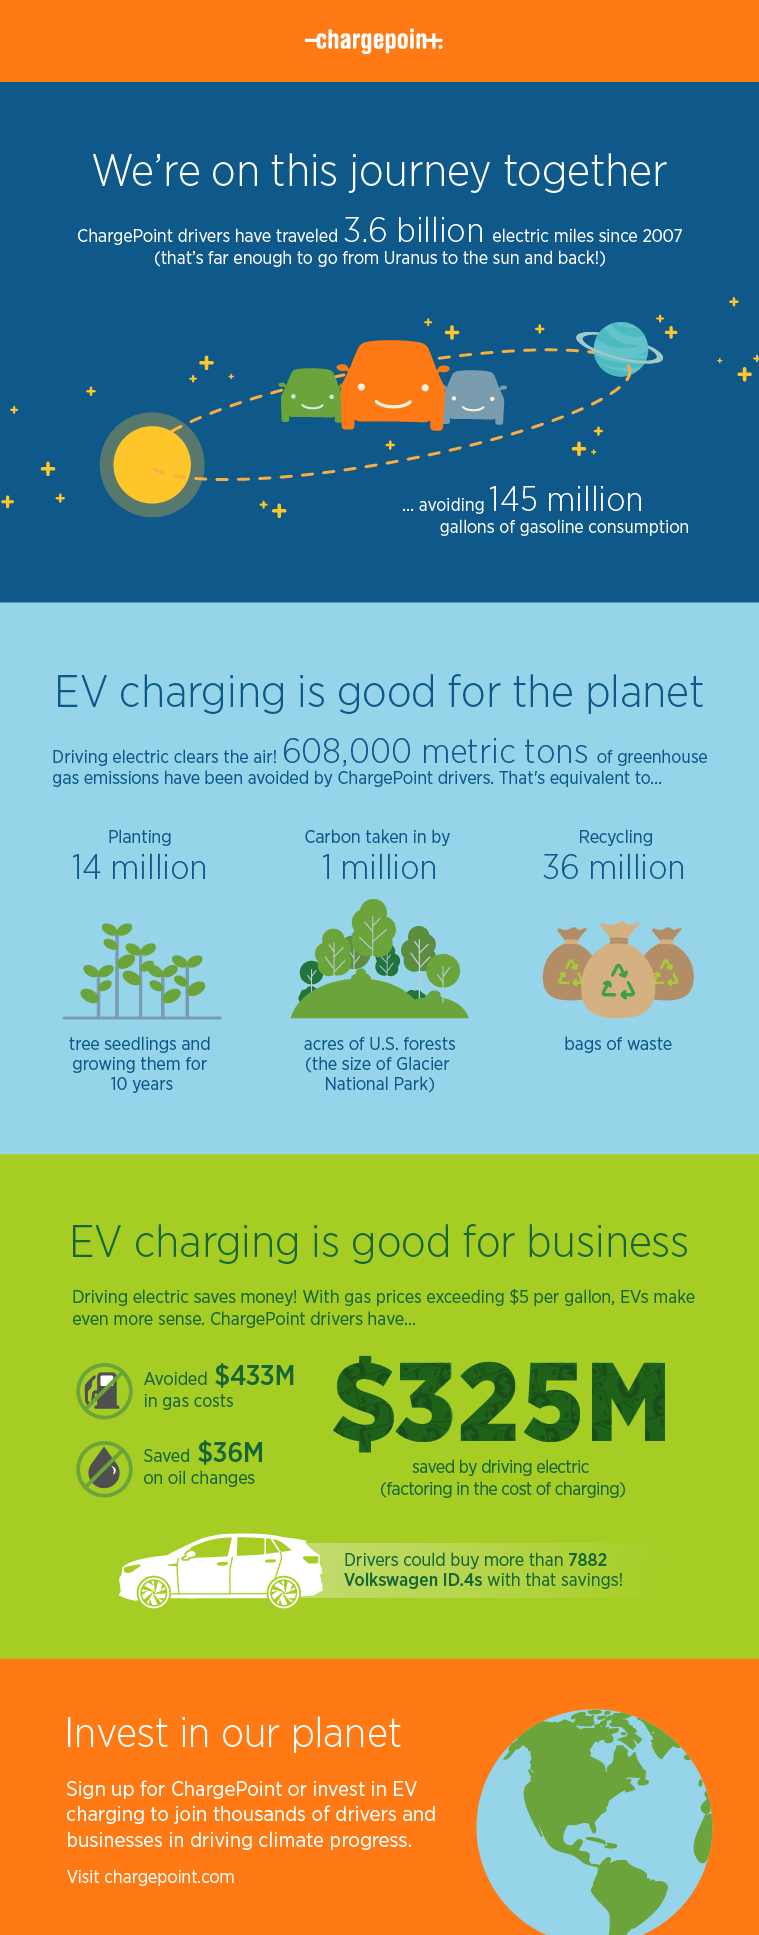 Invest in the planet on Earth Day with ChargePoint EV charging